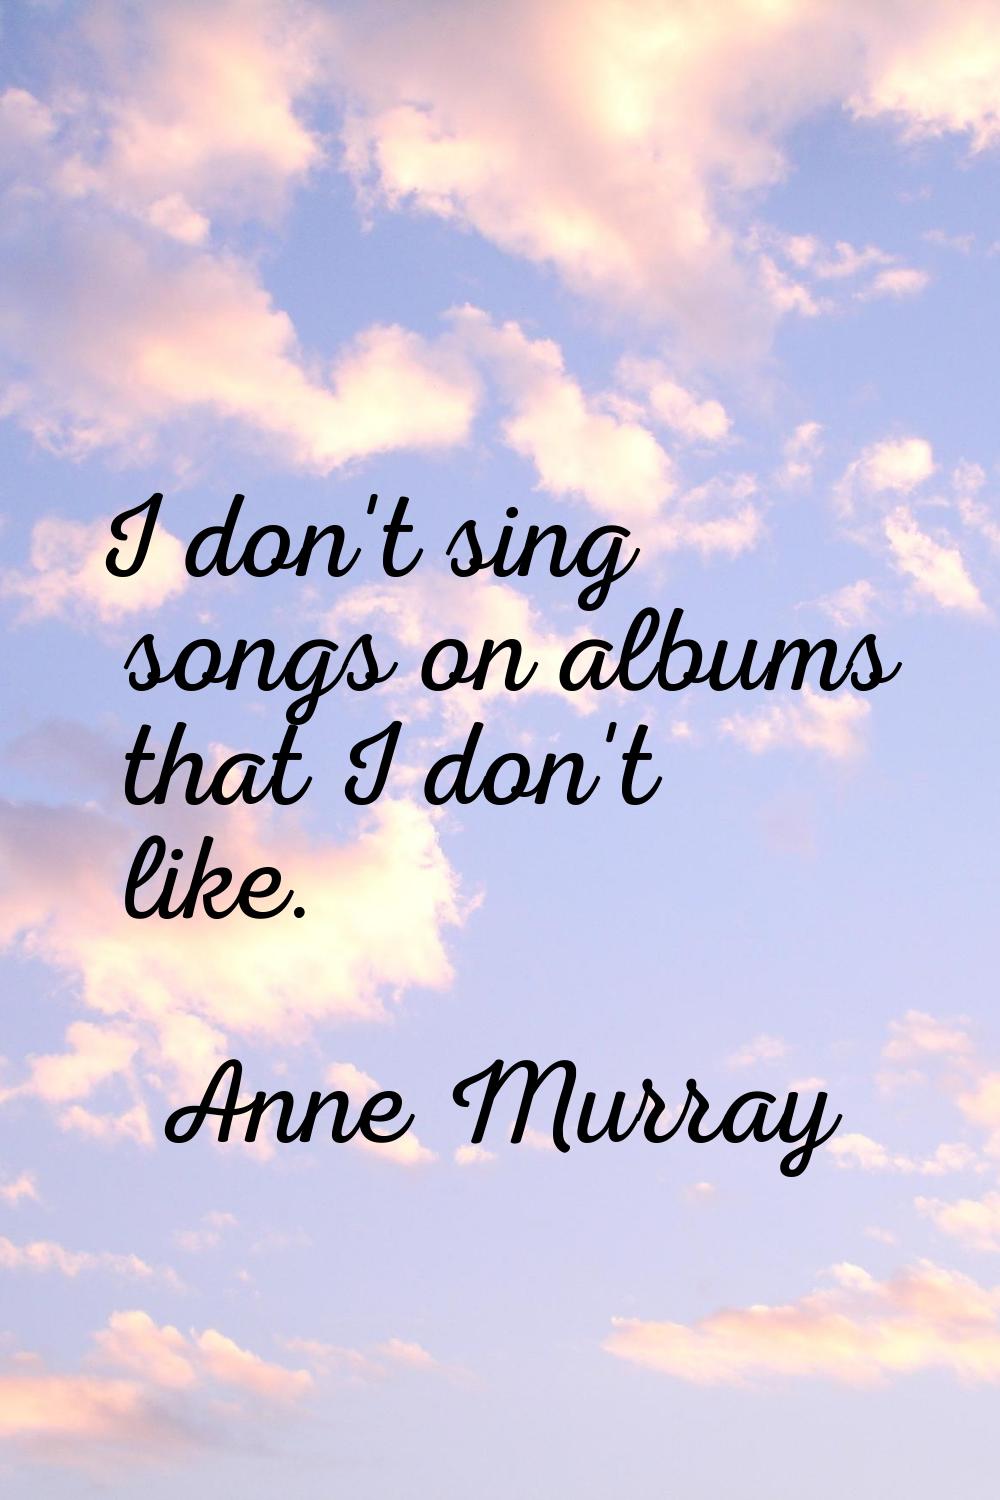 I don't sing songs on albums that I don't like.